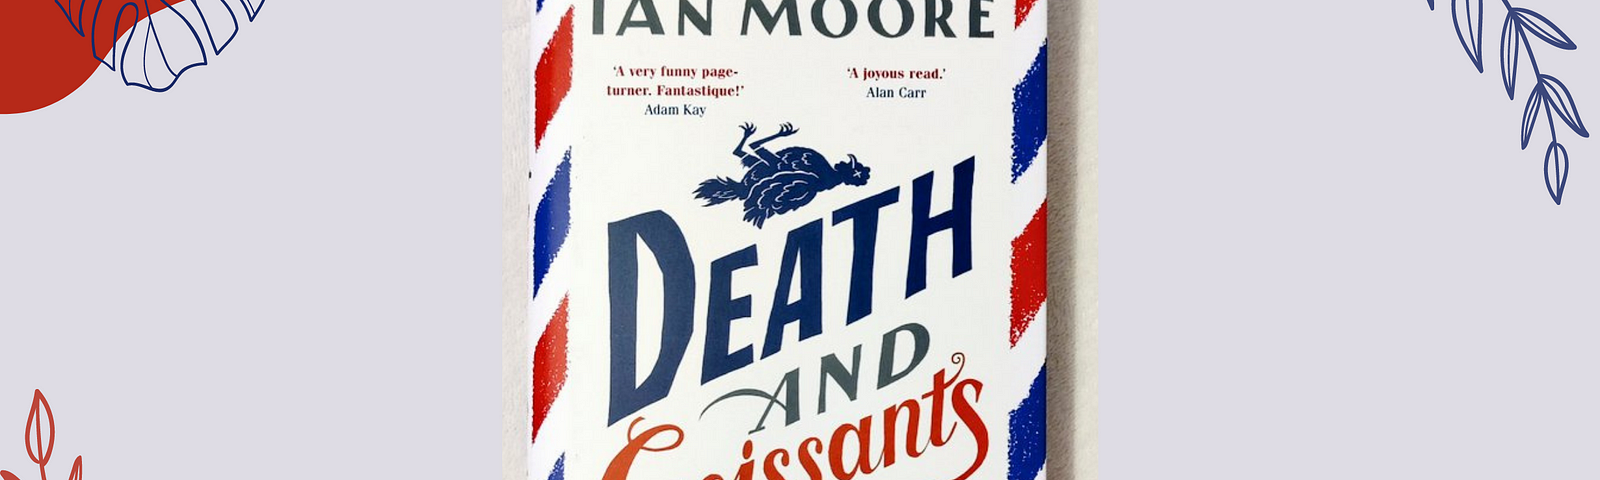 Hardback of Death and Croissants by Ian Moore on a light grey background with botanical illustrations around the corners.